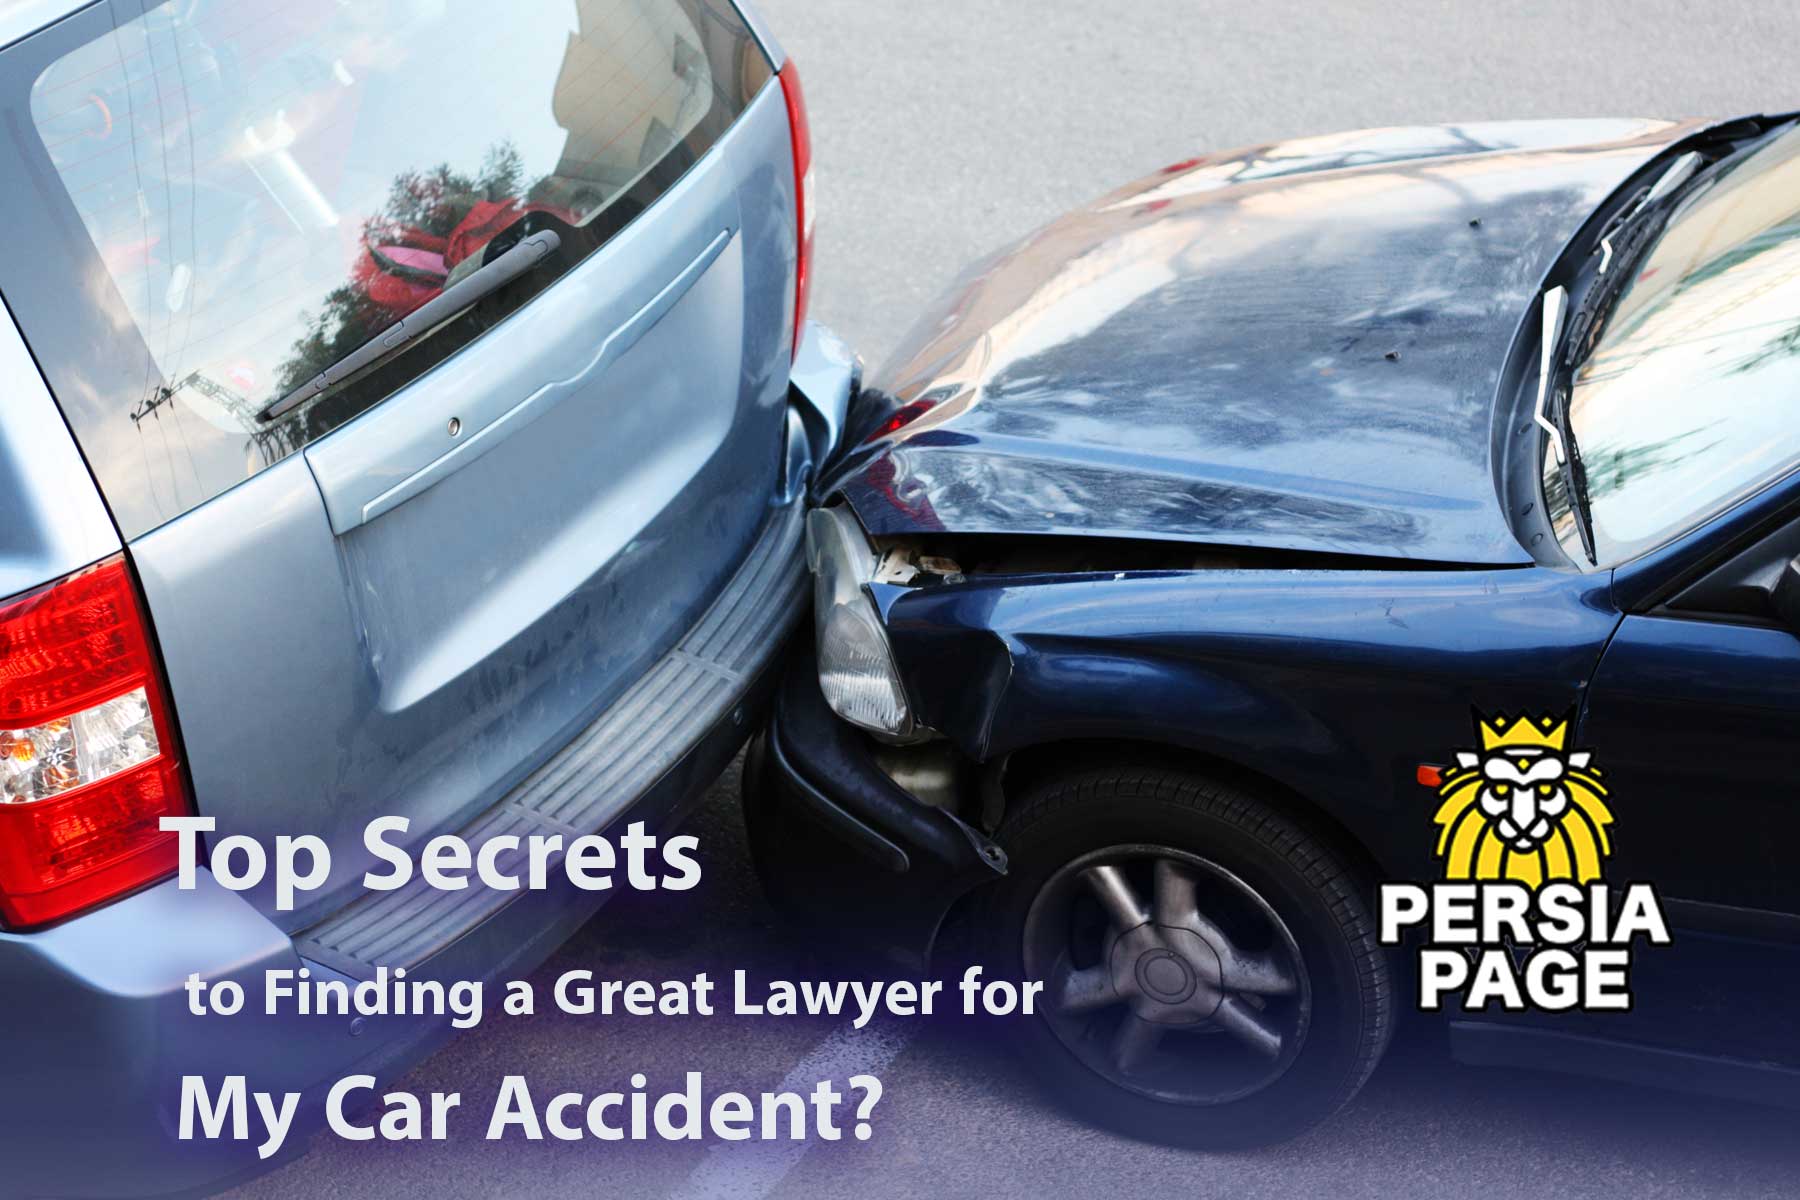 Top Secrets to Finding a Great Lawyer for My Car Accident?